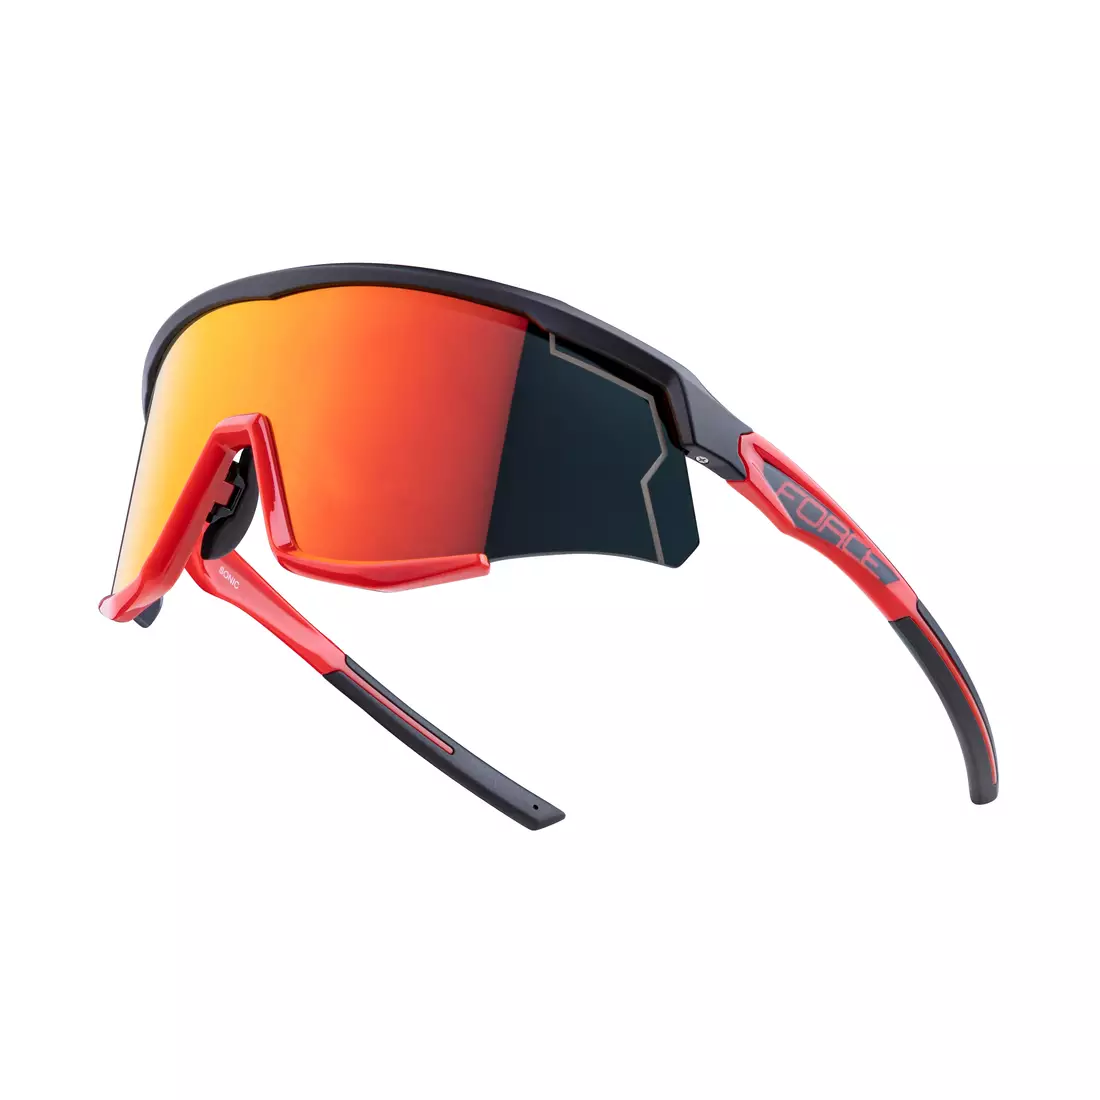 FORCE cycling / sports glasses SONIC, black and red, 910950